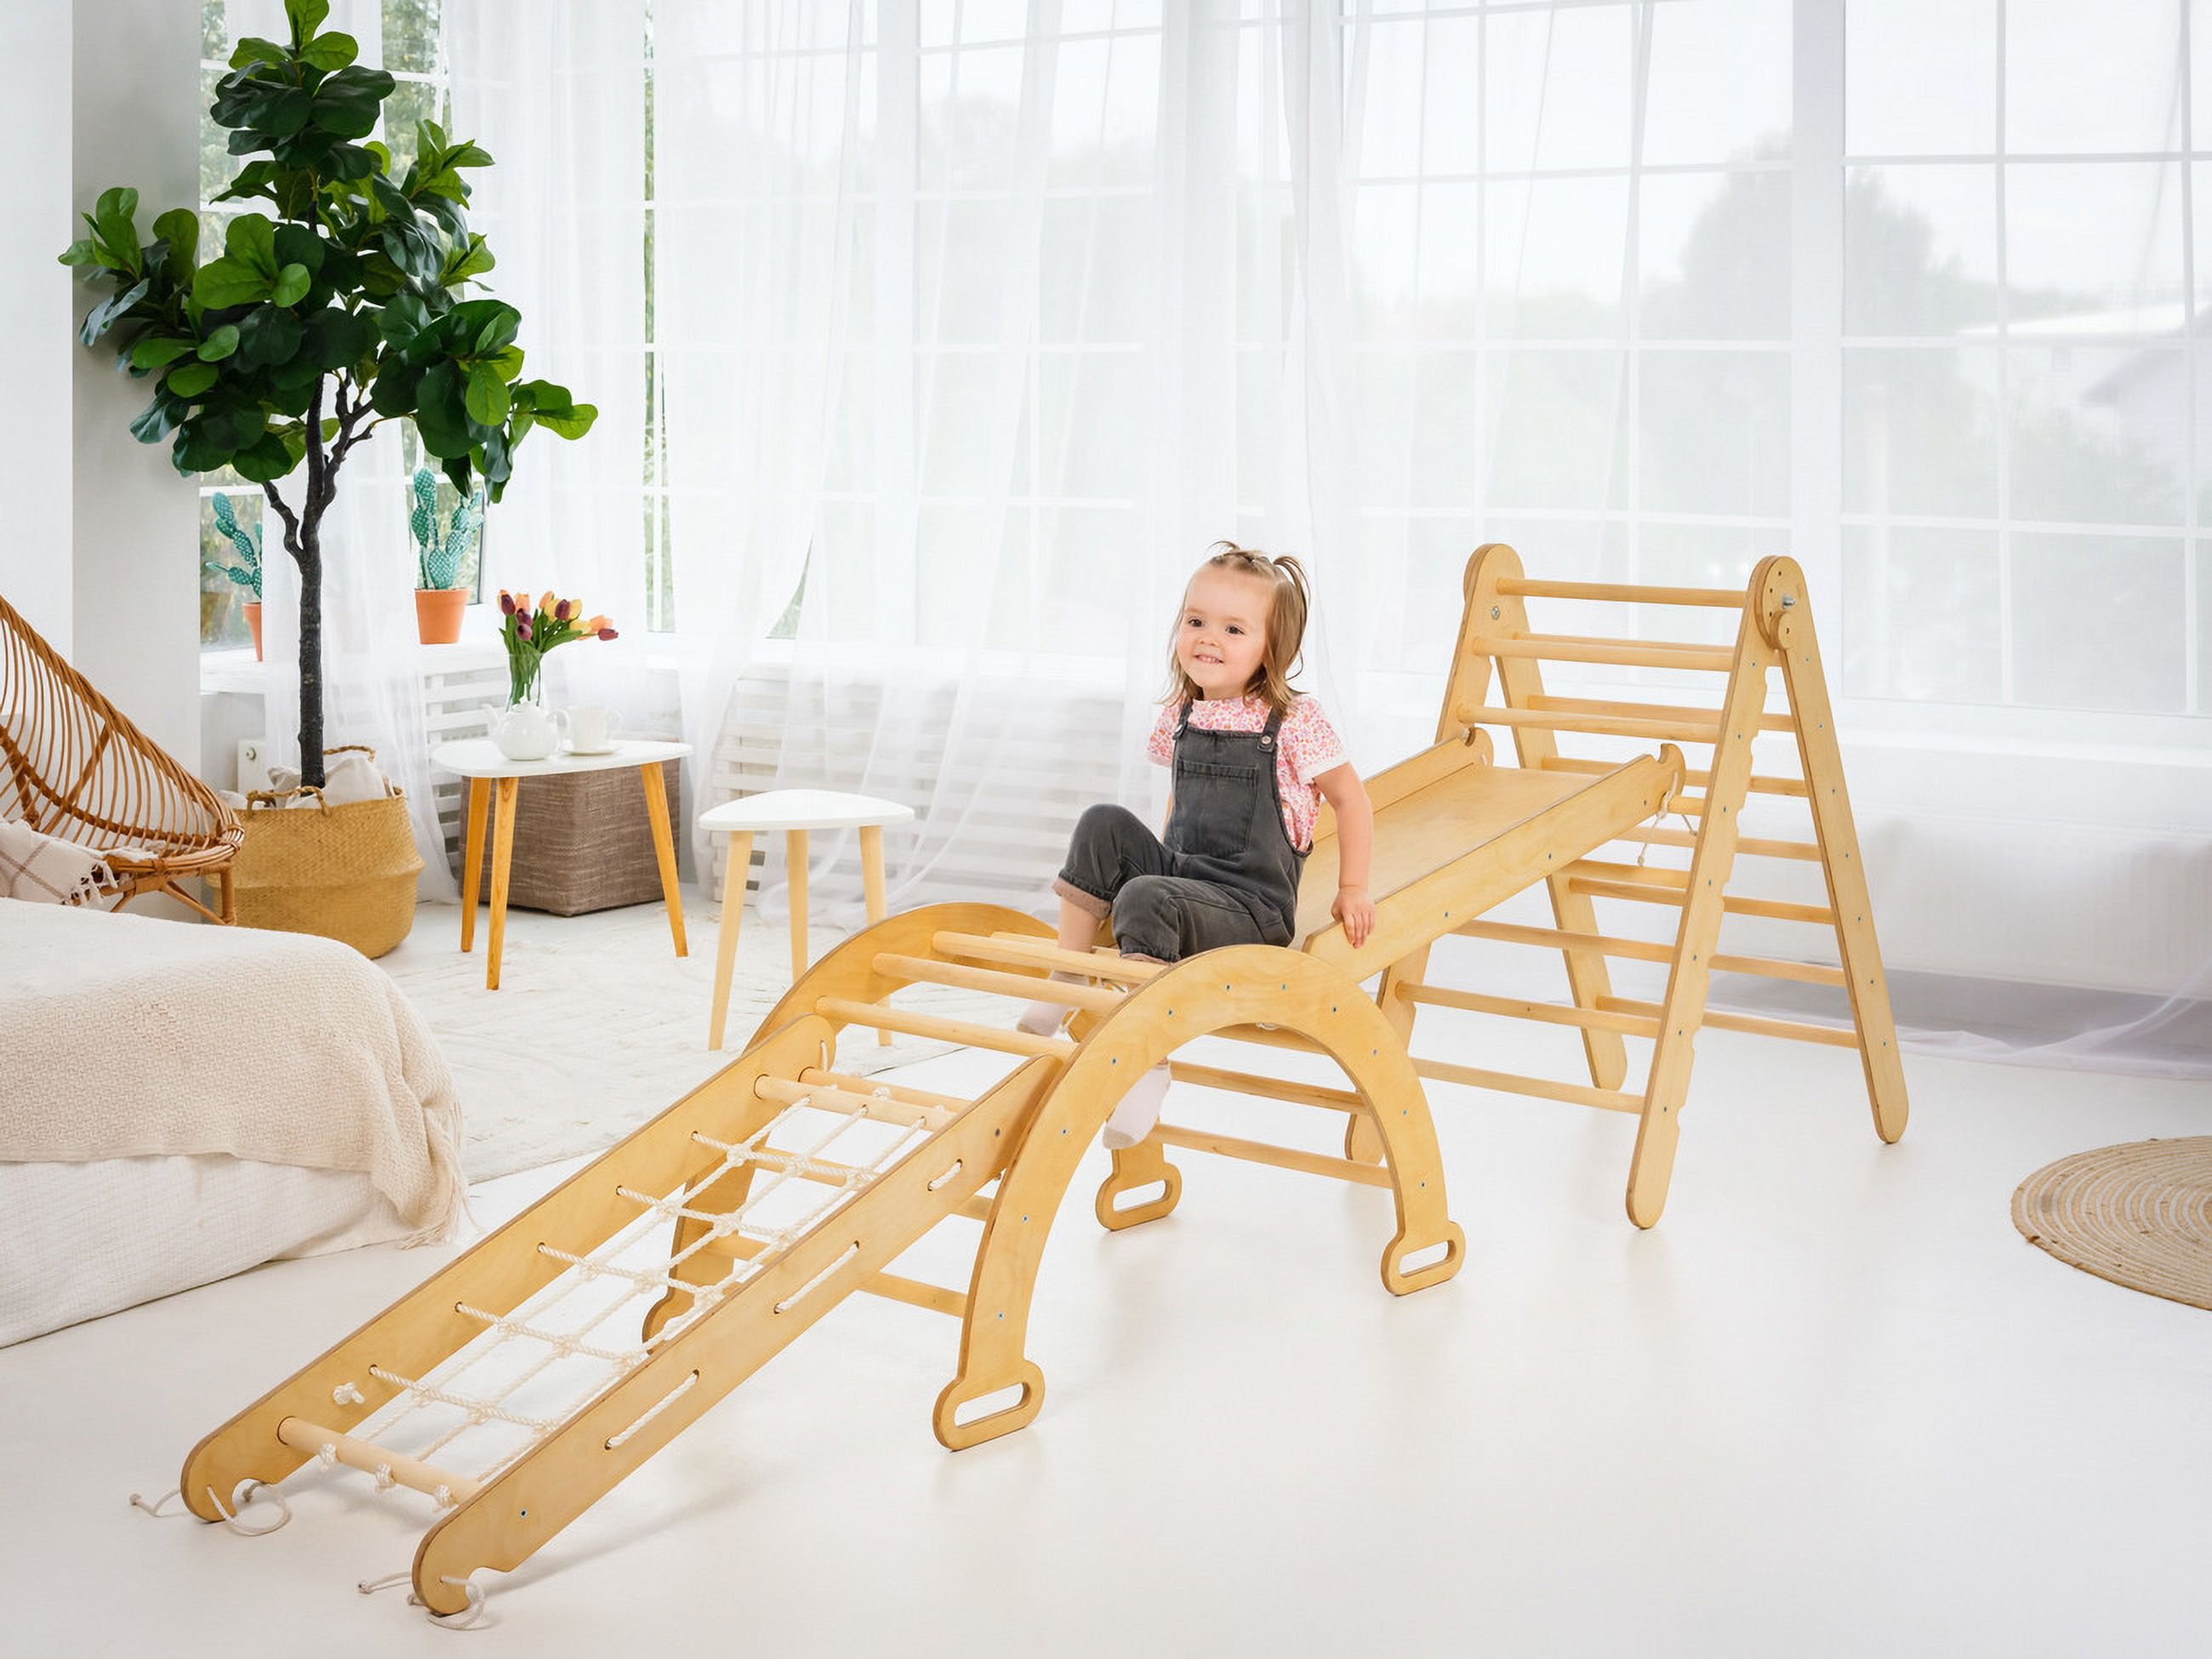 4-in-1 Montessori Indoor Playground: Wooden Foldable Triangle Ladder + Climbing Arch (Rocker Balance) + Slide Board (Ramp) + Spider Net for Kids 1-7 y.o. - image 3 of 8